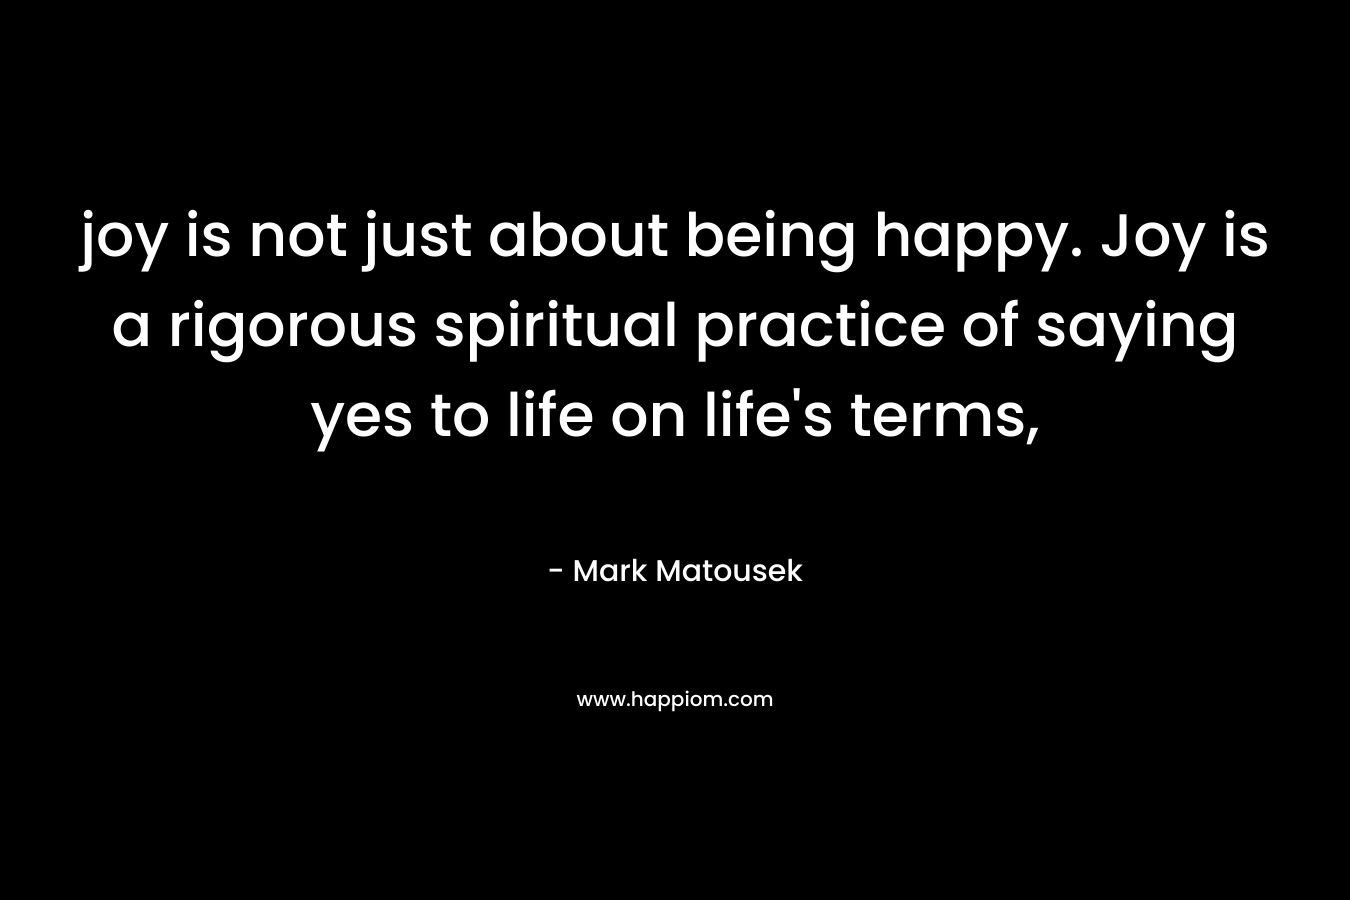 joy is not just about being happy. Joy is a rigorous spiritual practice of saying yes to life on life’s terms, – Mark Matousek